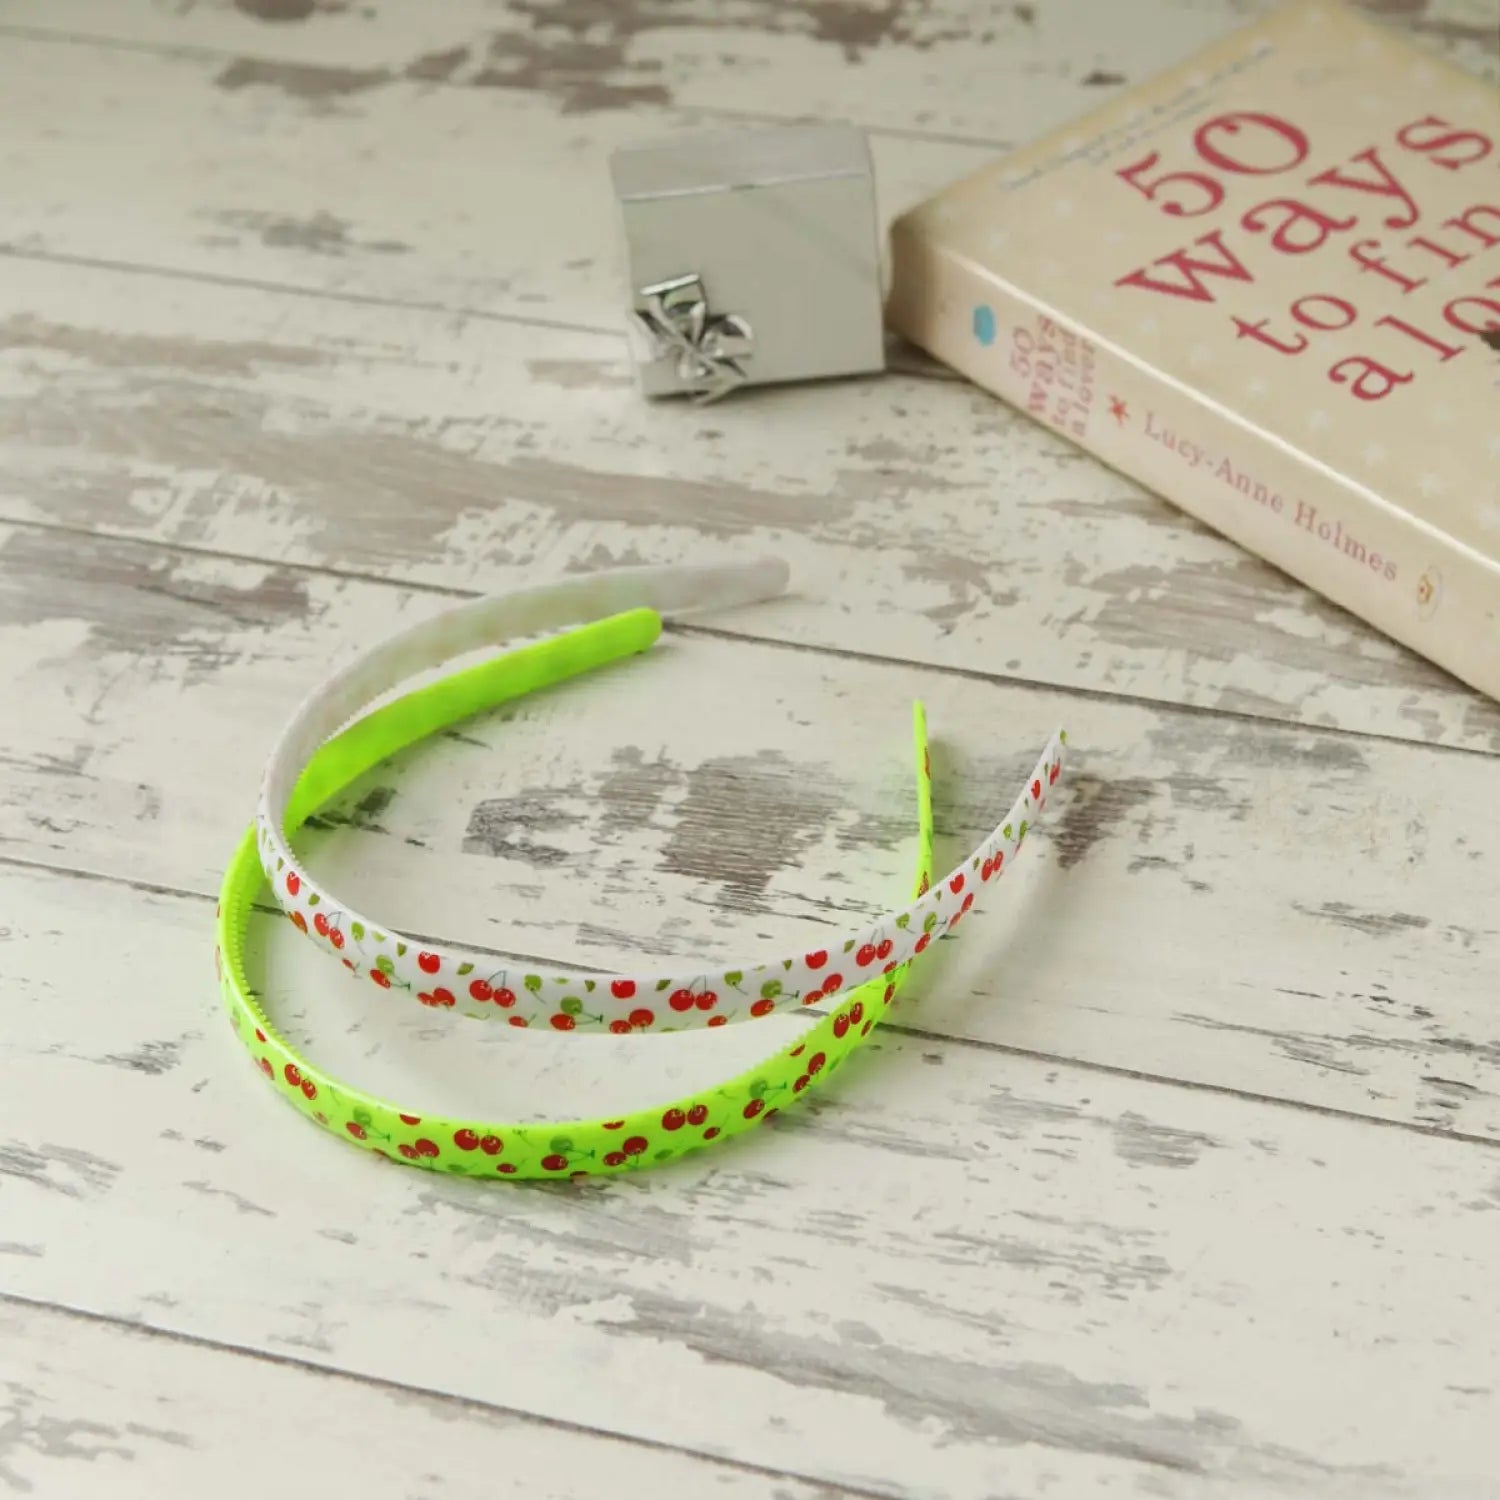 a green and white bracelet with red polka dots